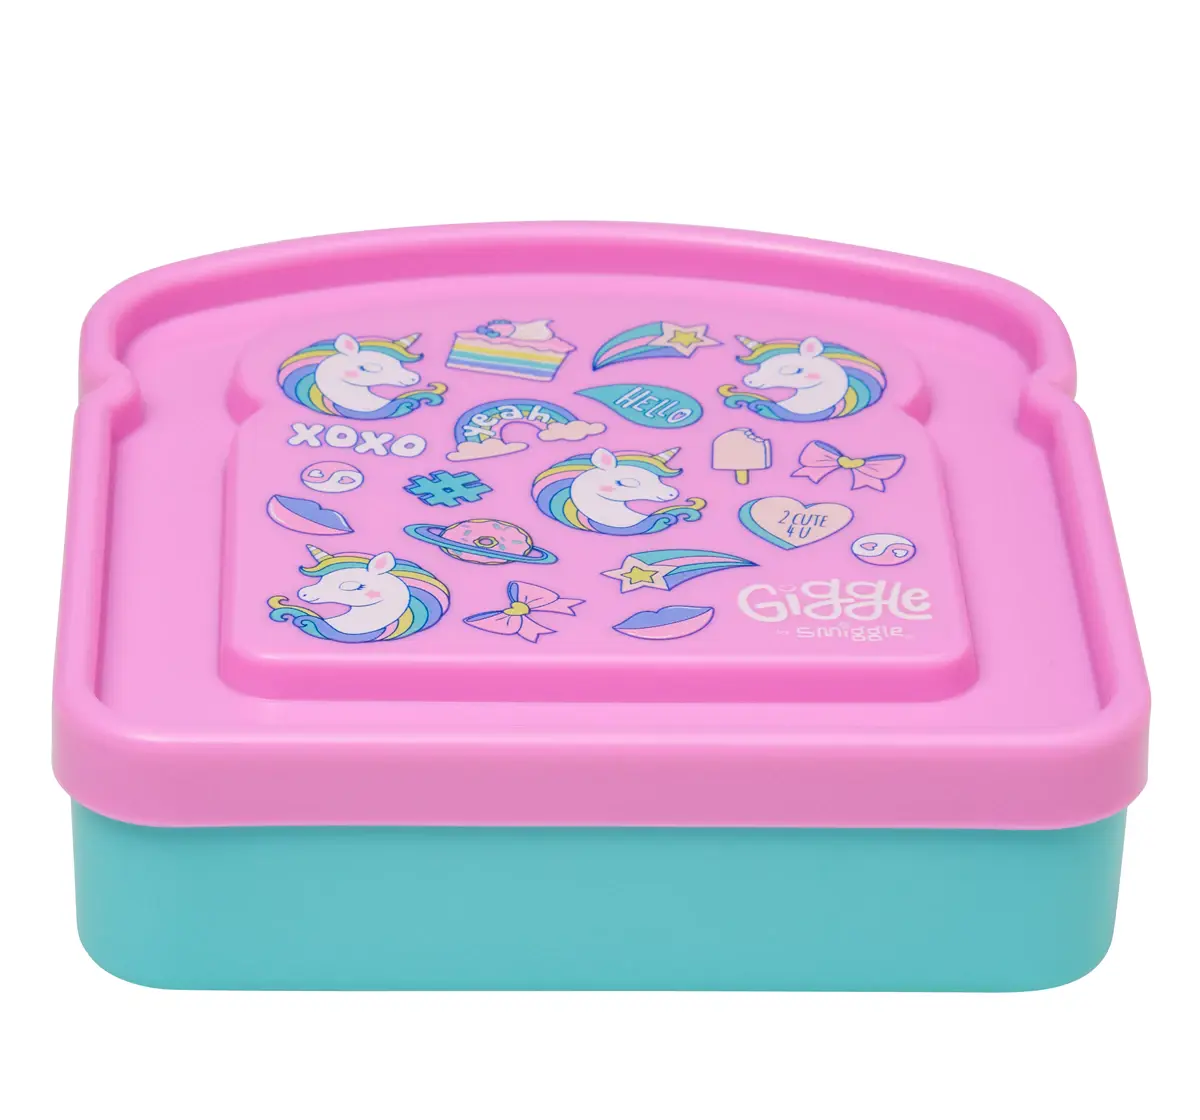 Smiggle Giggle 7 Sandwich Container, Pink, 3Y+